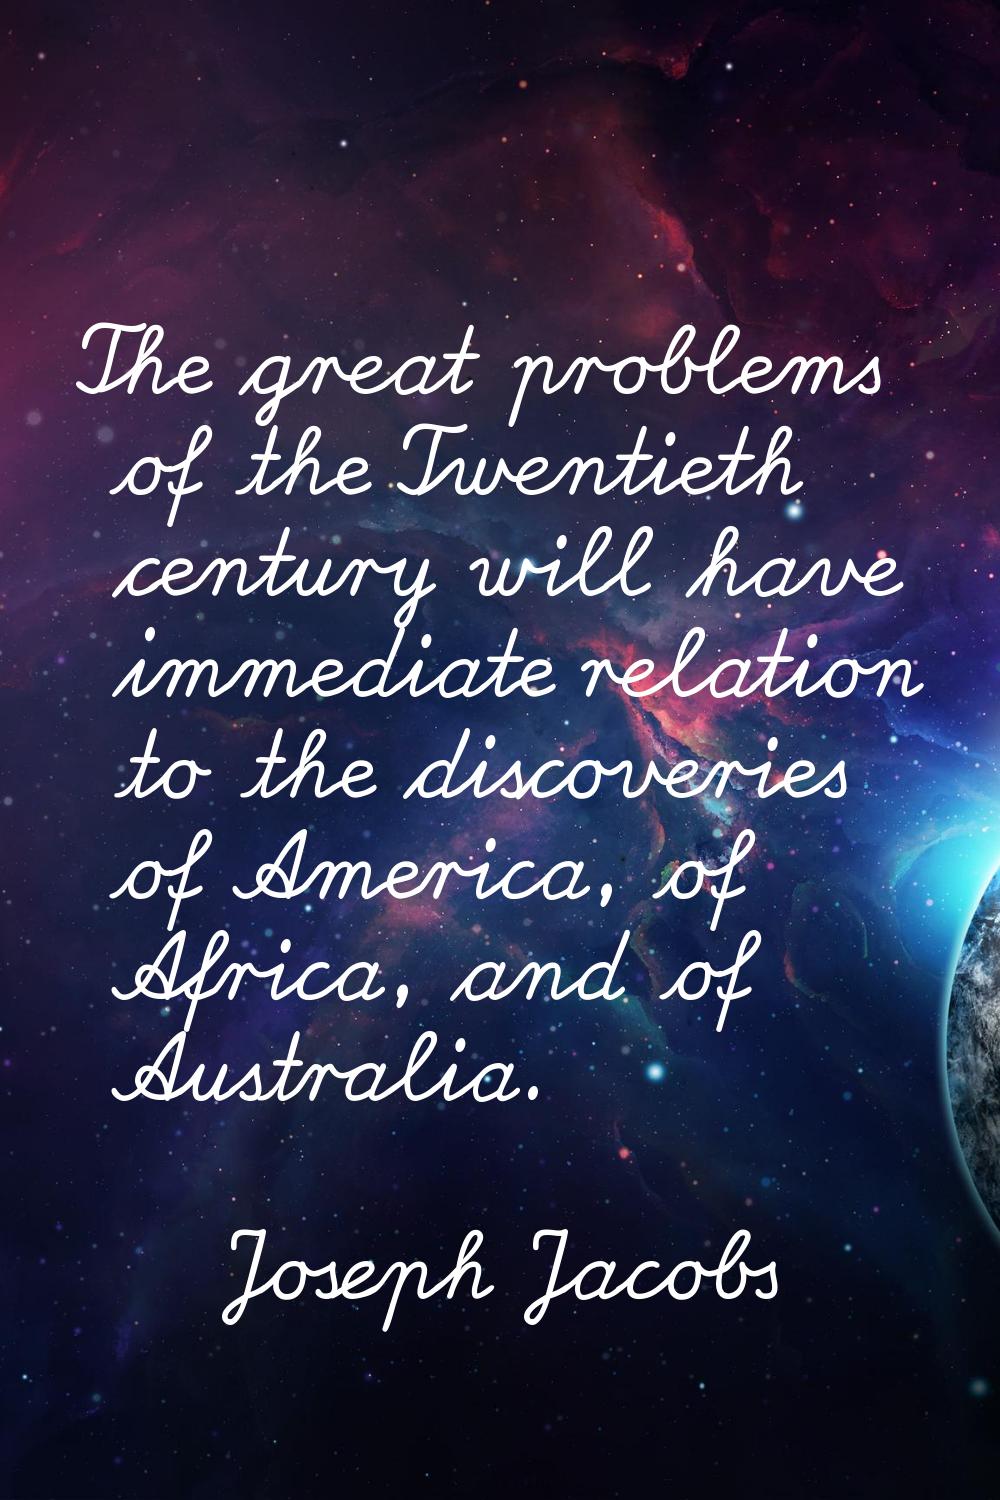 The great problems of the Twentieth century will have immediate relation to the discoveries of Amer